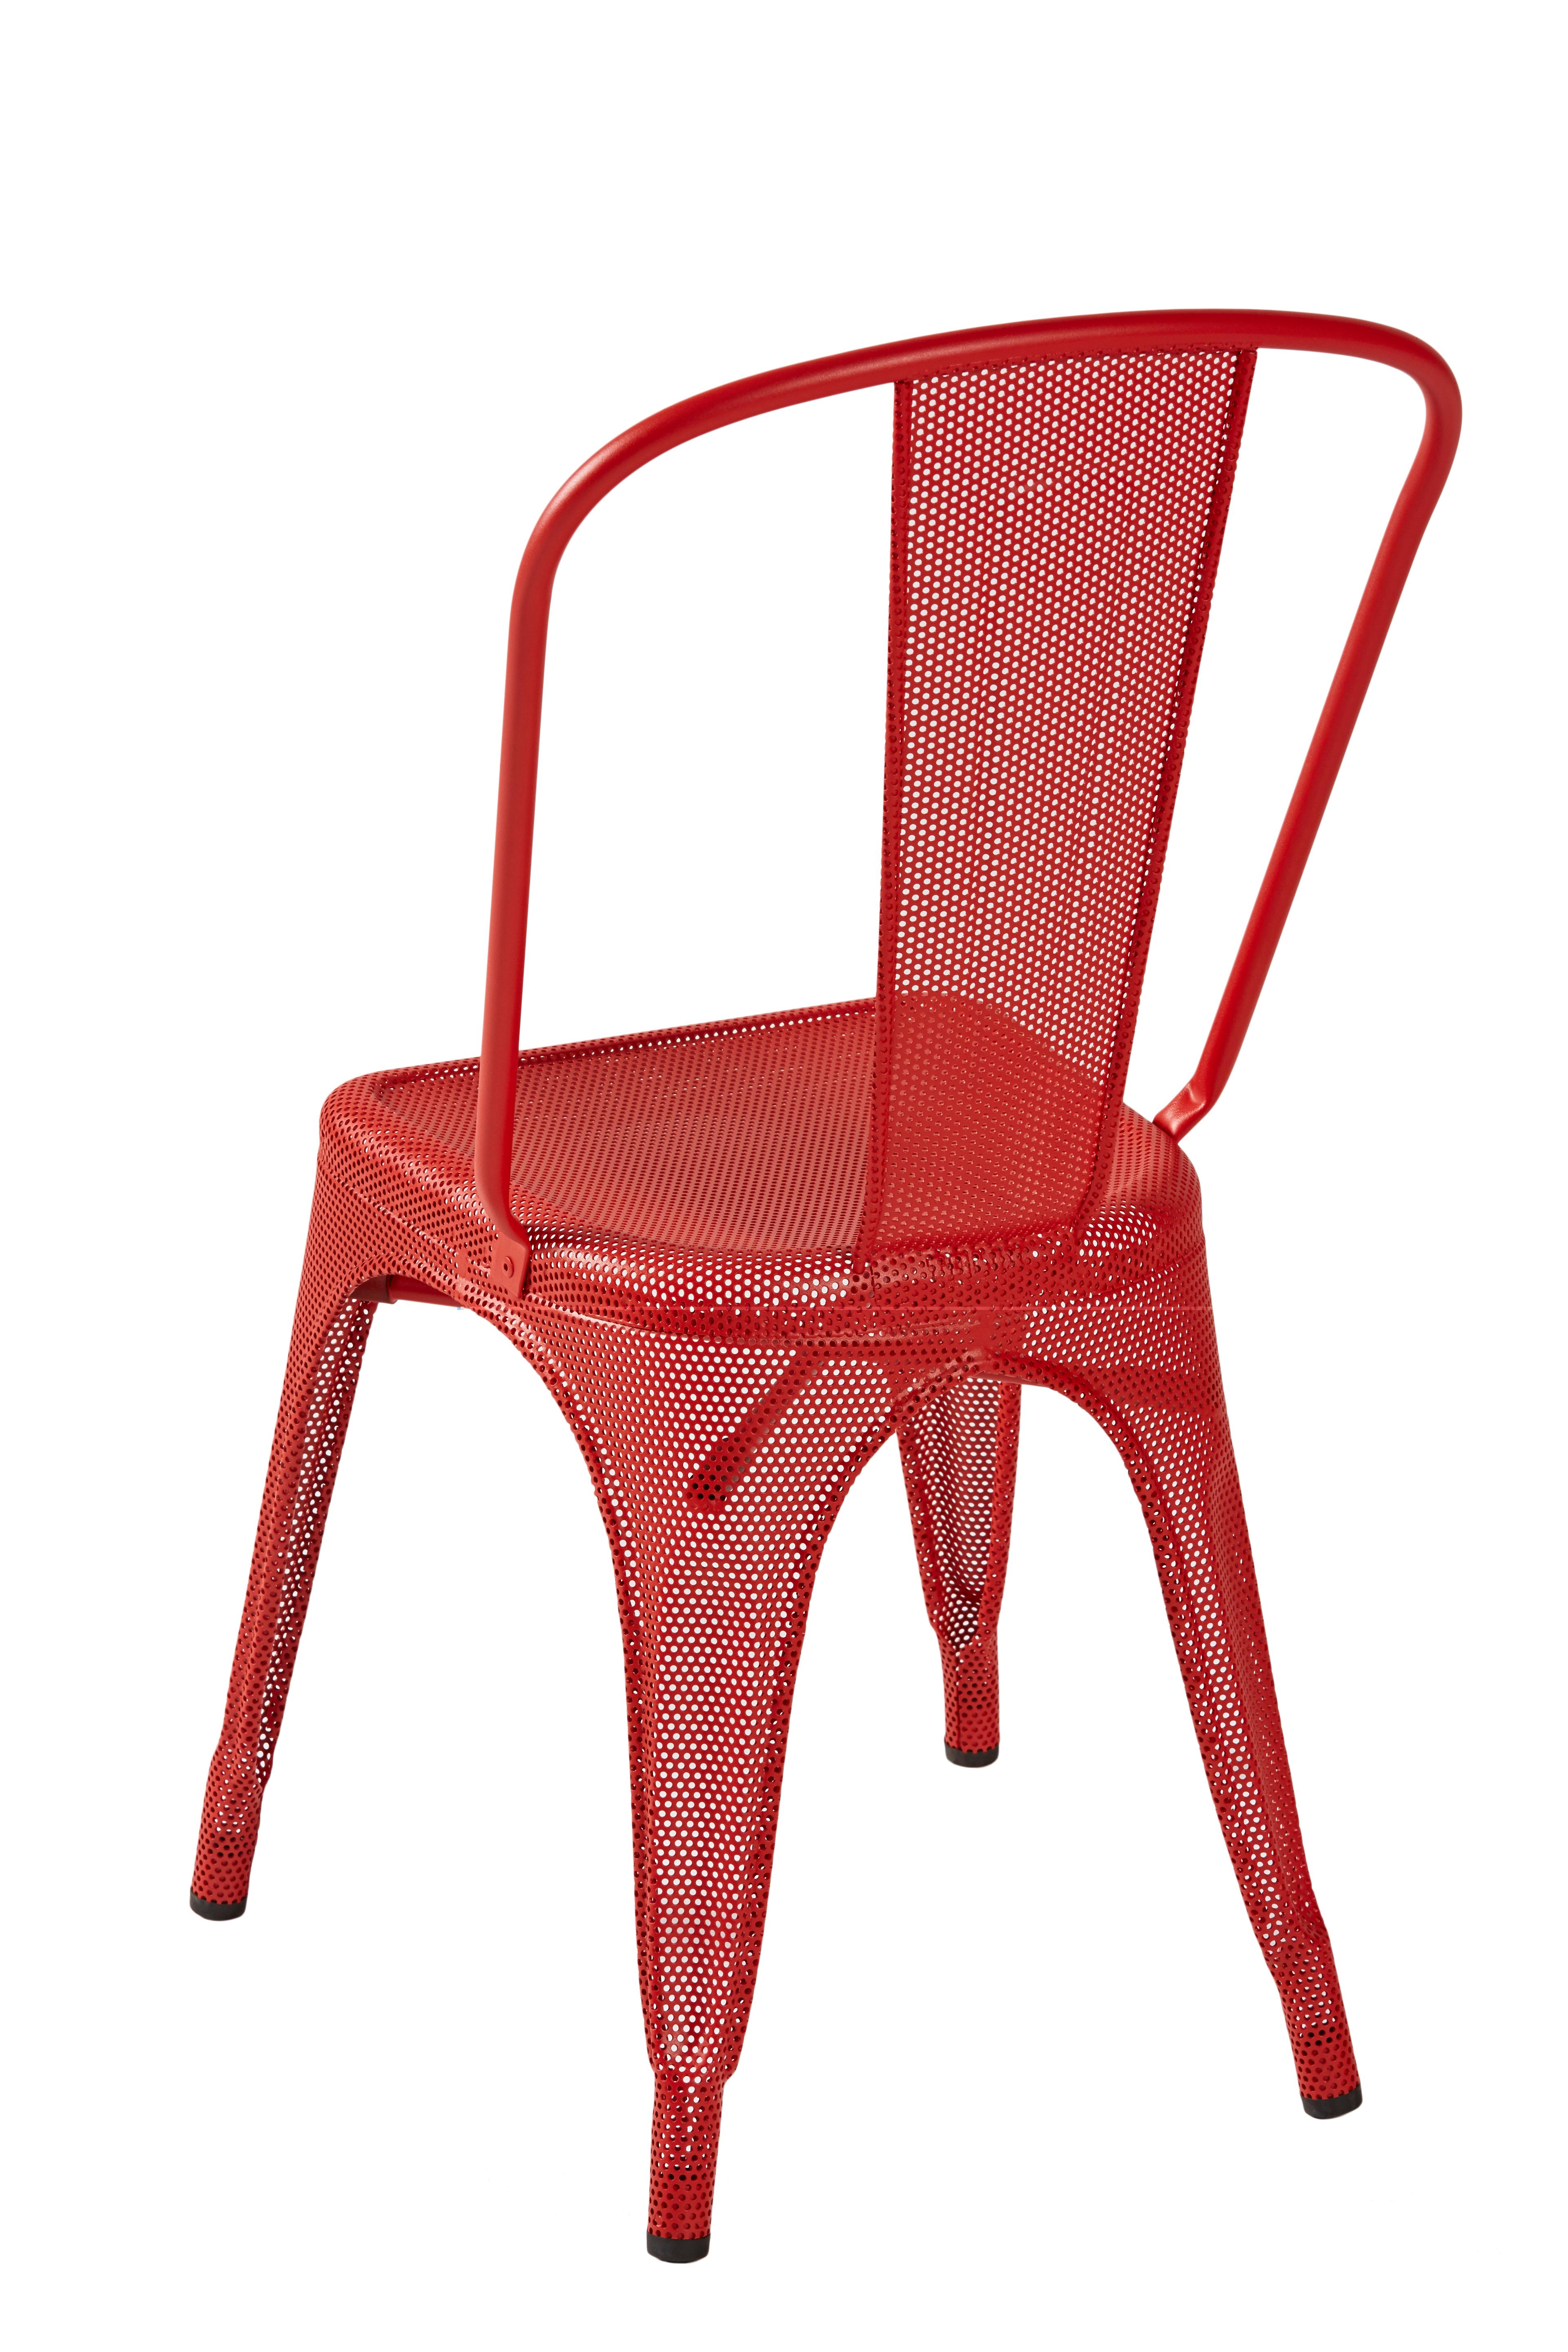 French Tolix A Chair Perforated Outdoor Painted in Chili For Sale